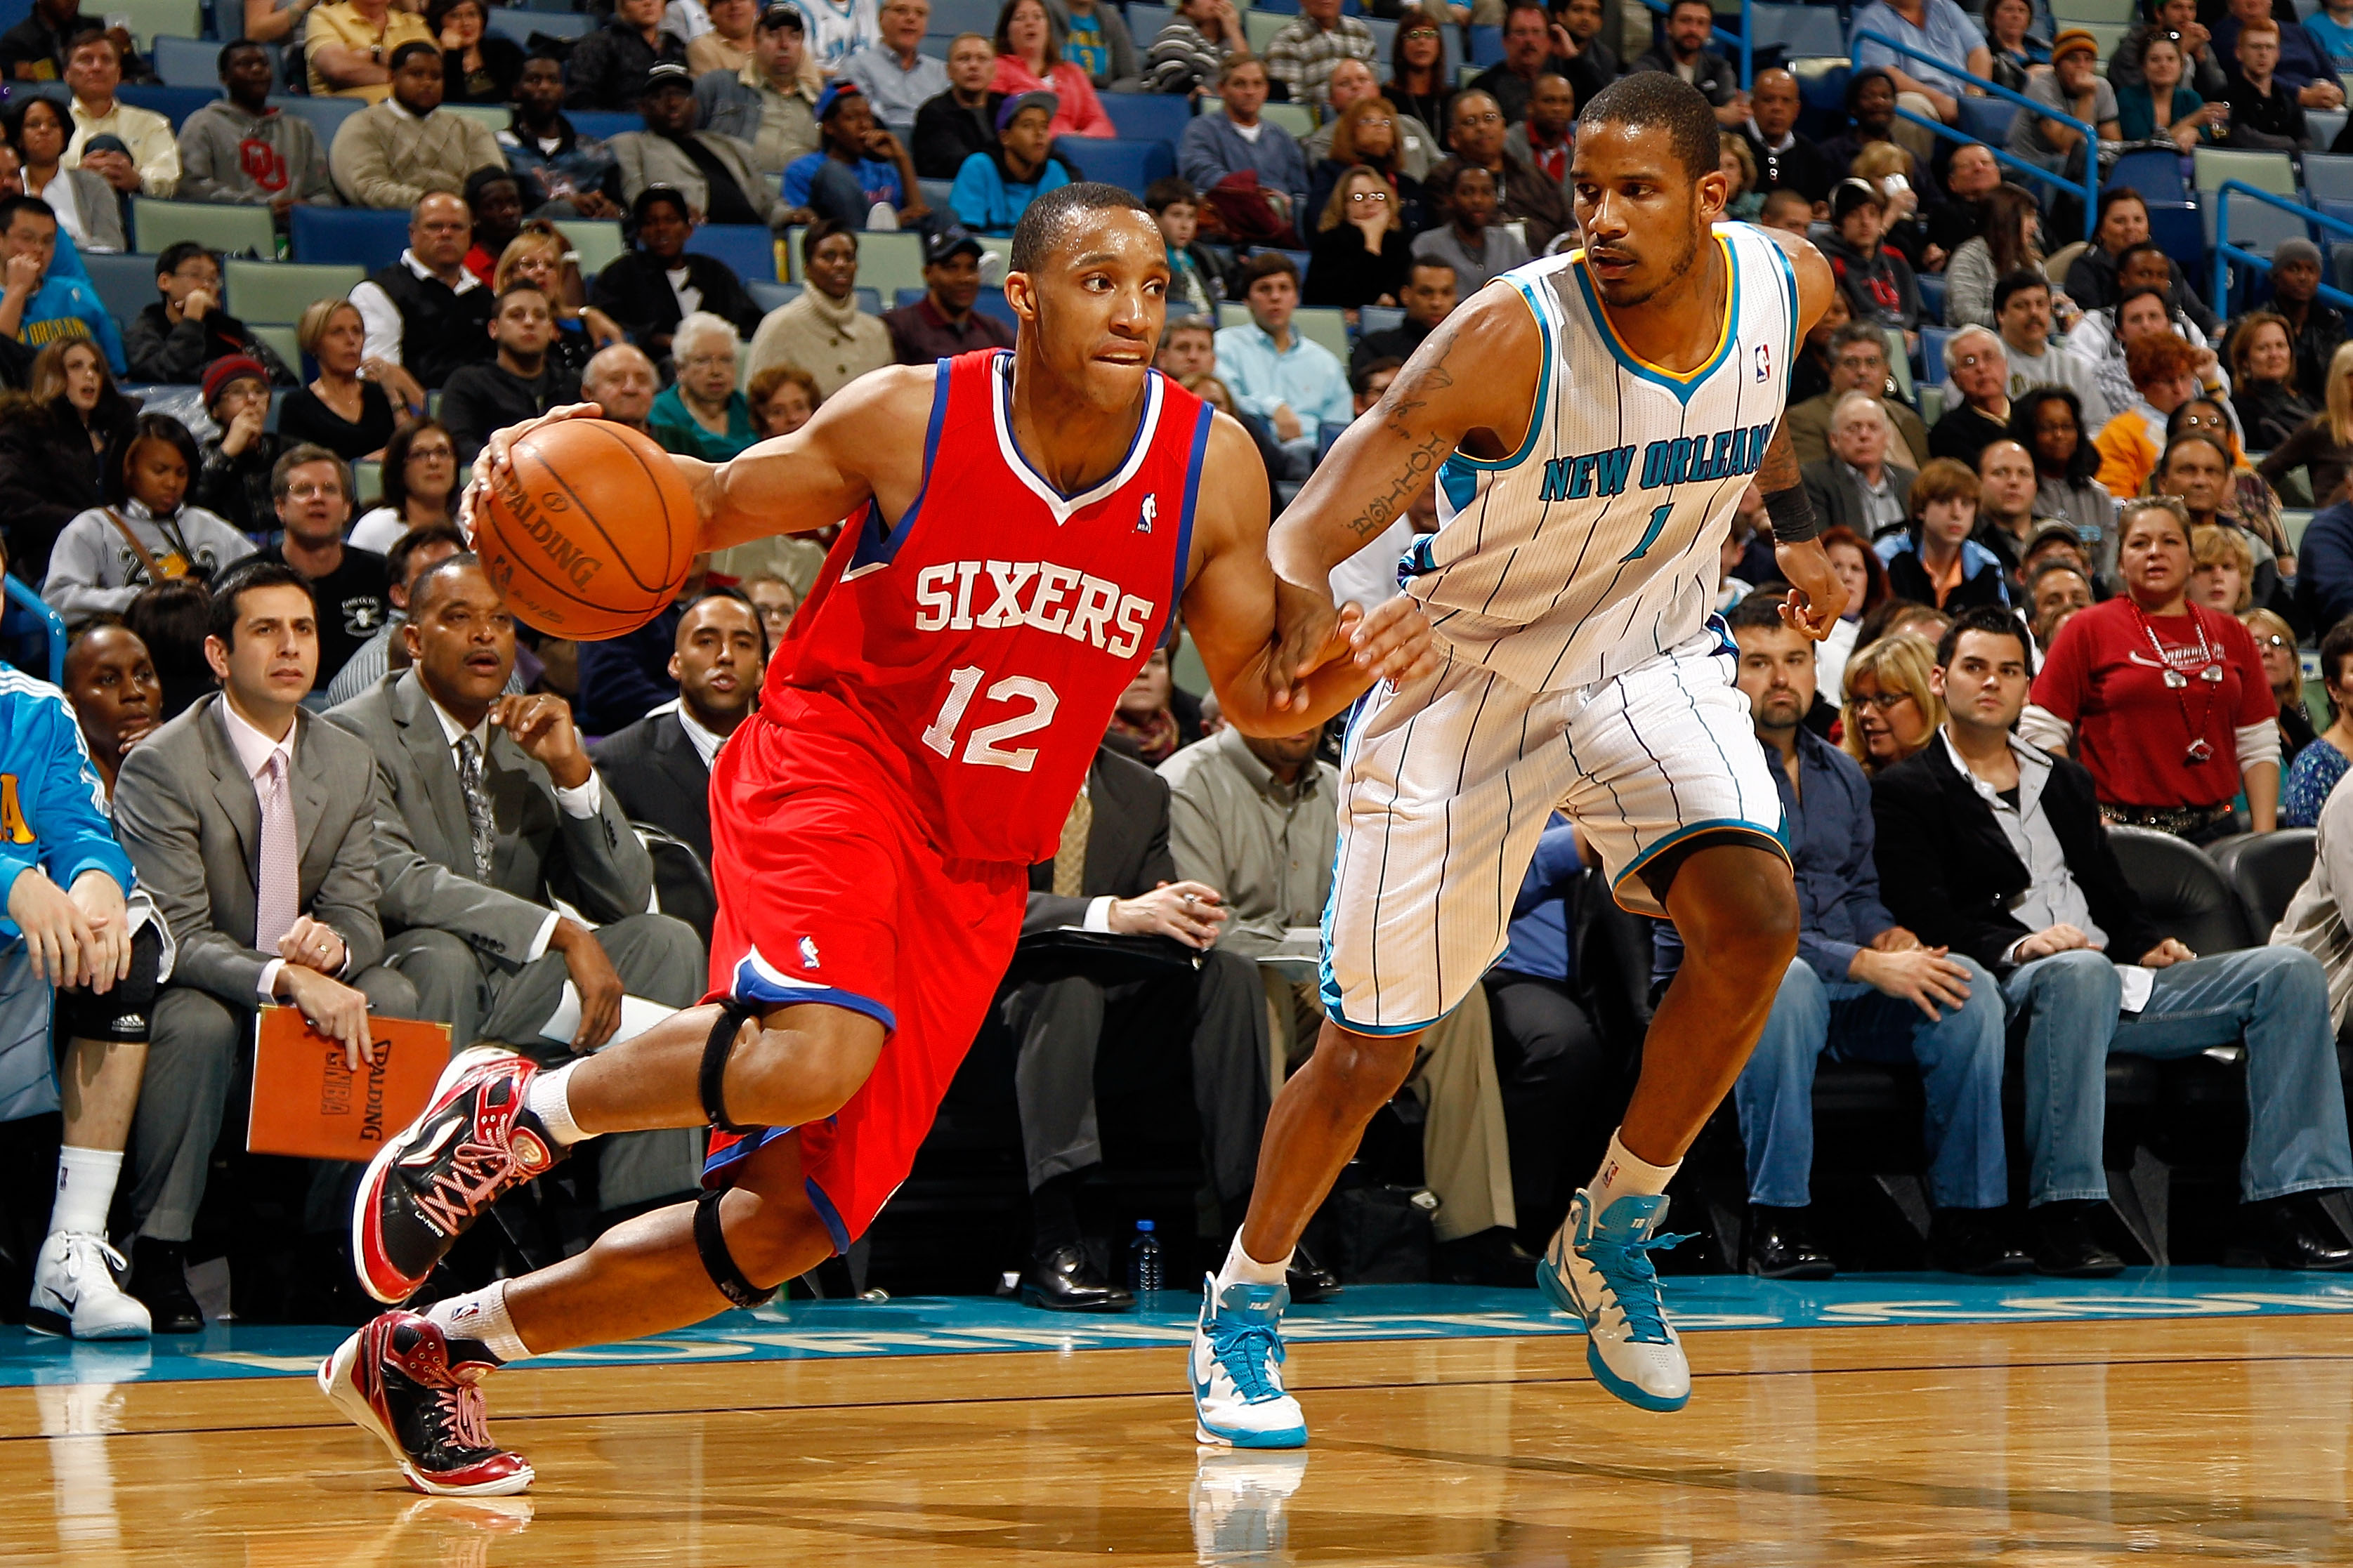 NEW ORLEANS, LA - JANUARY 03:  Evan Turner #12 of the Philadelphia 76ers drives on Trevor Ariza #1 of the New Orleans Hornets in the second half at New Orleans Arena on January 3, 2011 in New Orleans, Louisiana. NOTE TO USER: User expressly acknowledges a